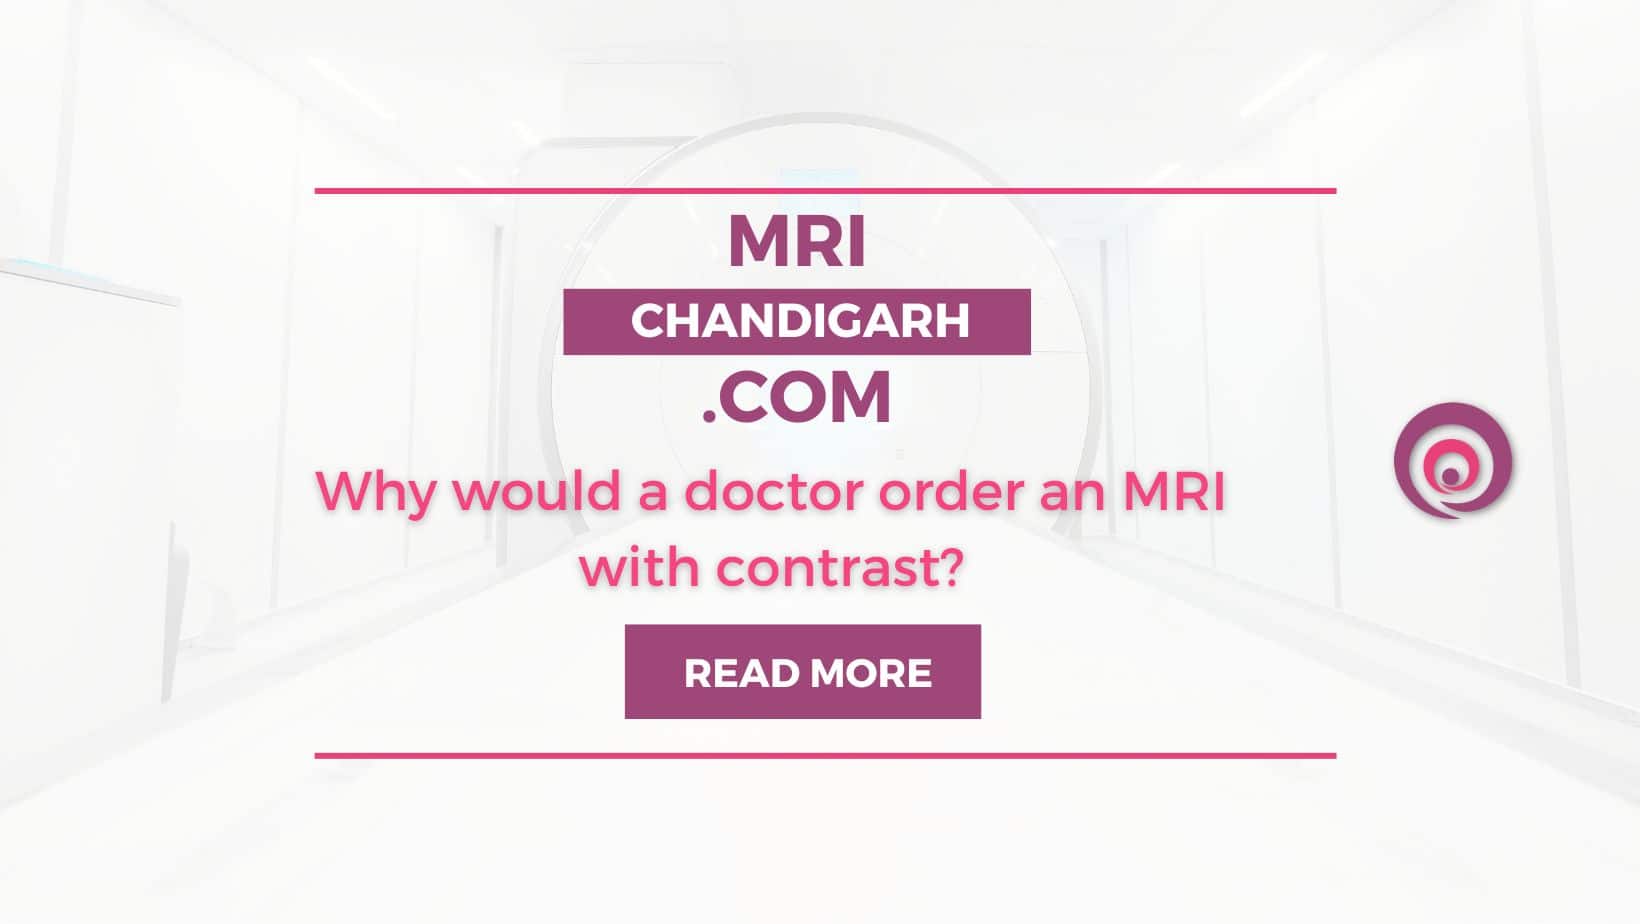 Why would a doctor order an MRI with contrast?